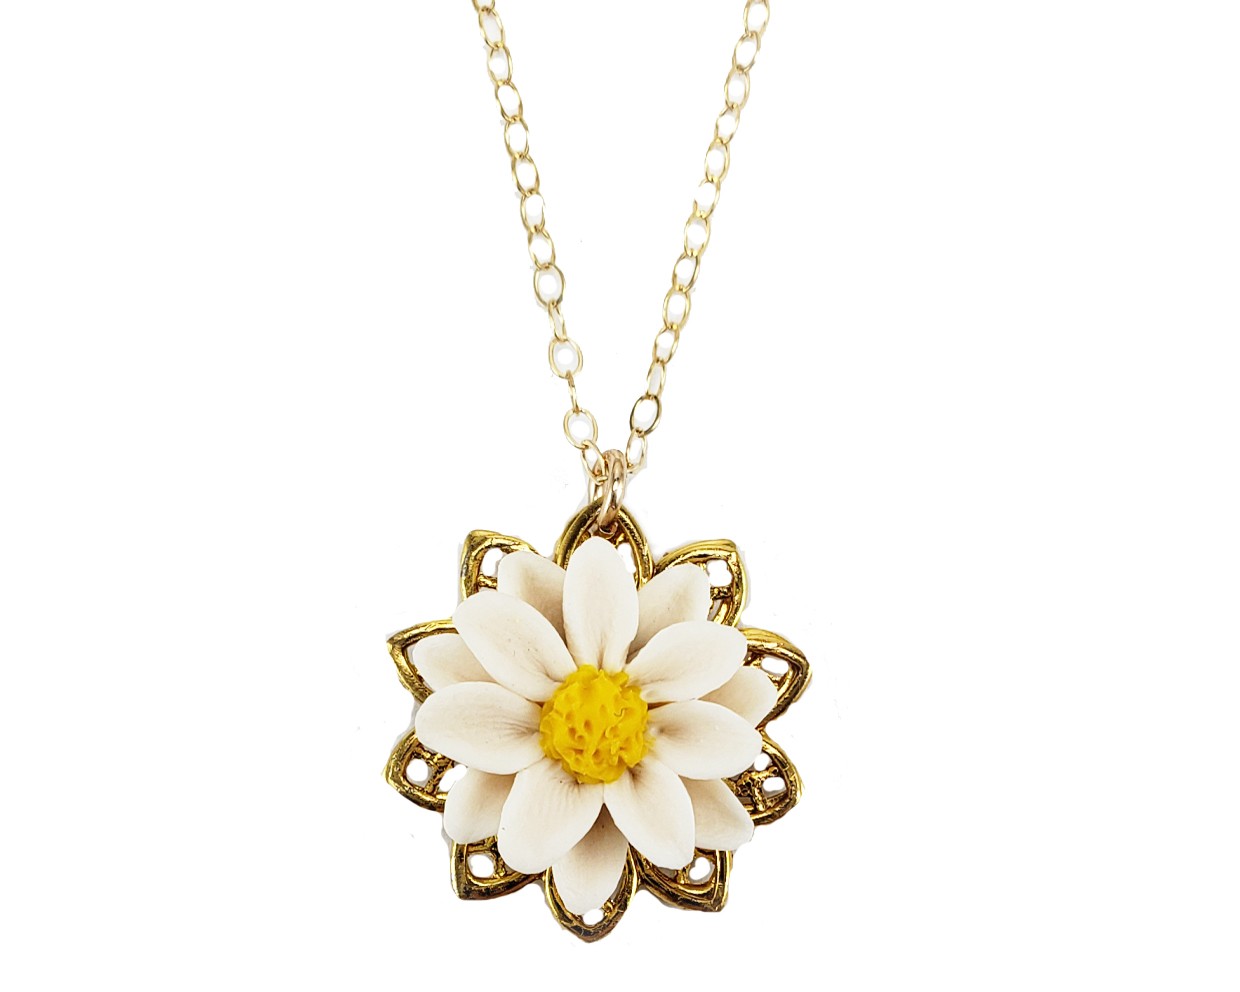 Real handmade Daisy flower pendant on 14 16 18 inch  quality Curb Chain necklace with gold leaf.